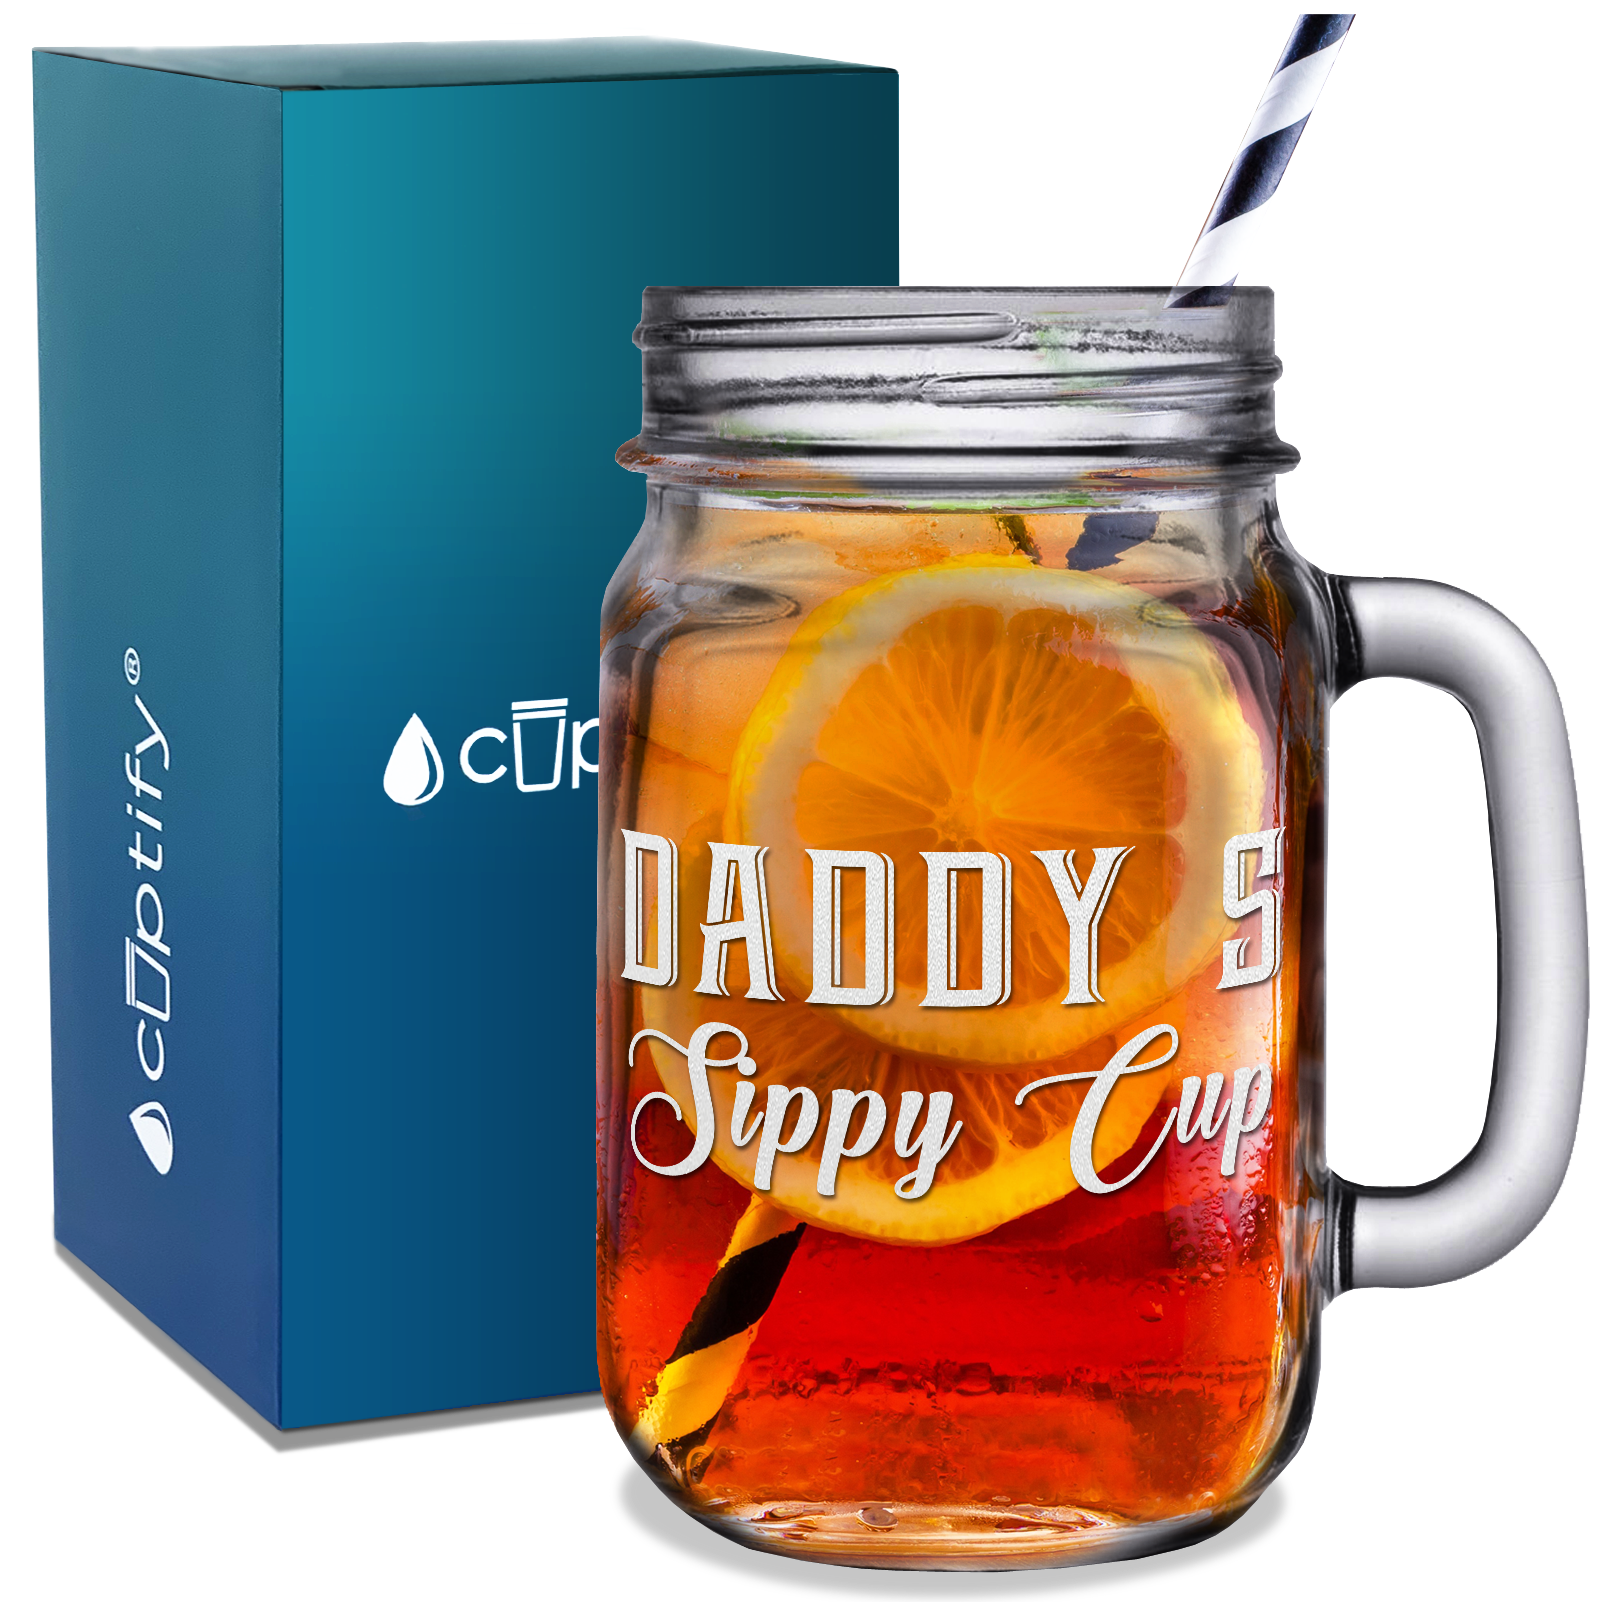 Daddy's Sippy Cup Etched on 16oz Mason Jar Glass